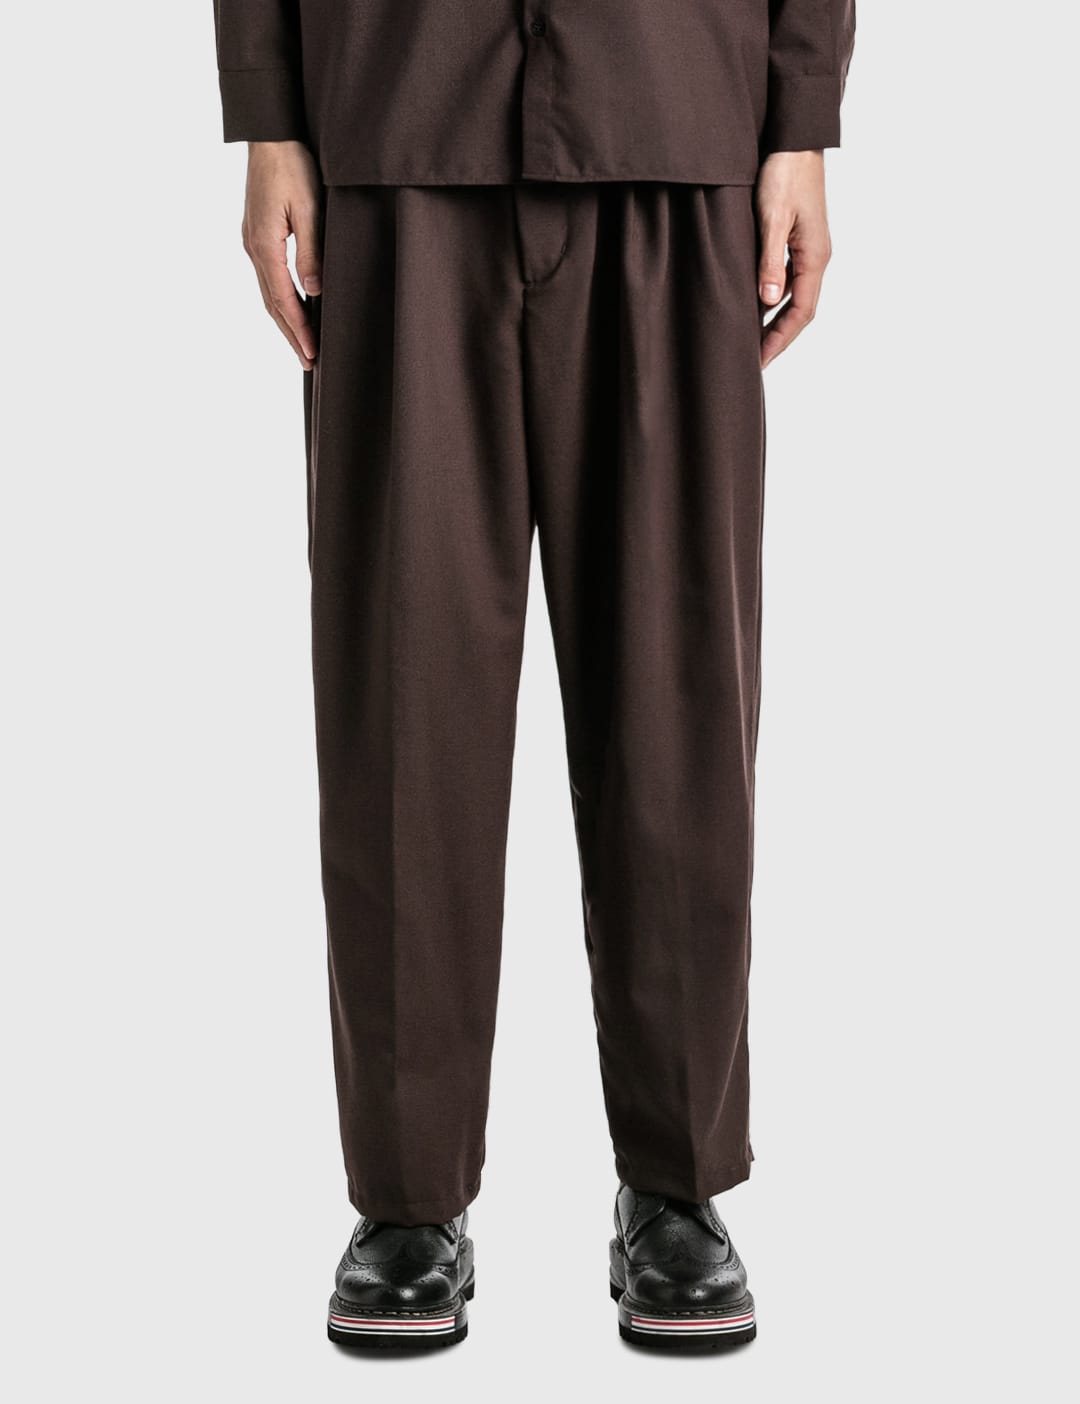 Cootie Productions - T/W 2 Tuck Easy Pants | HBX - Globally